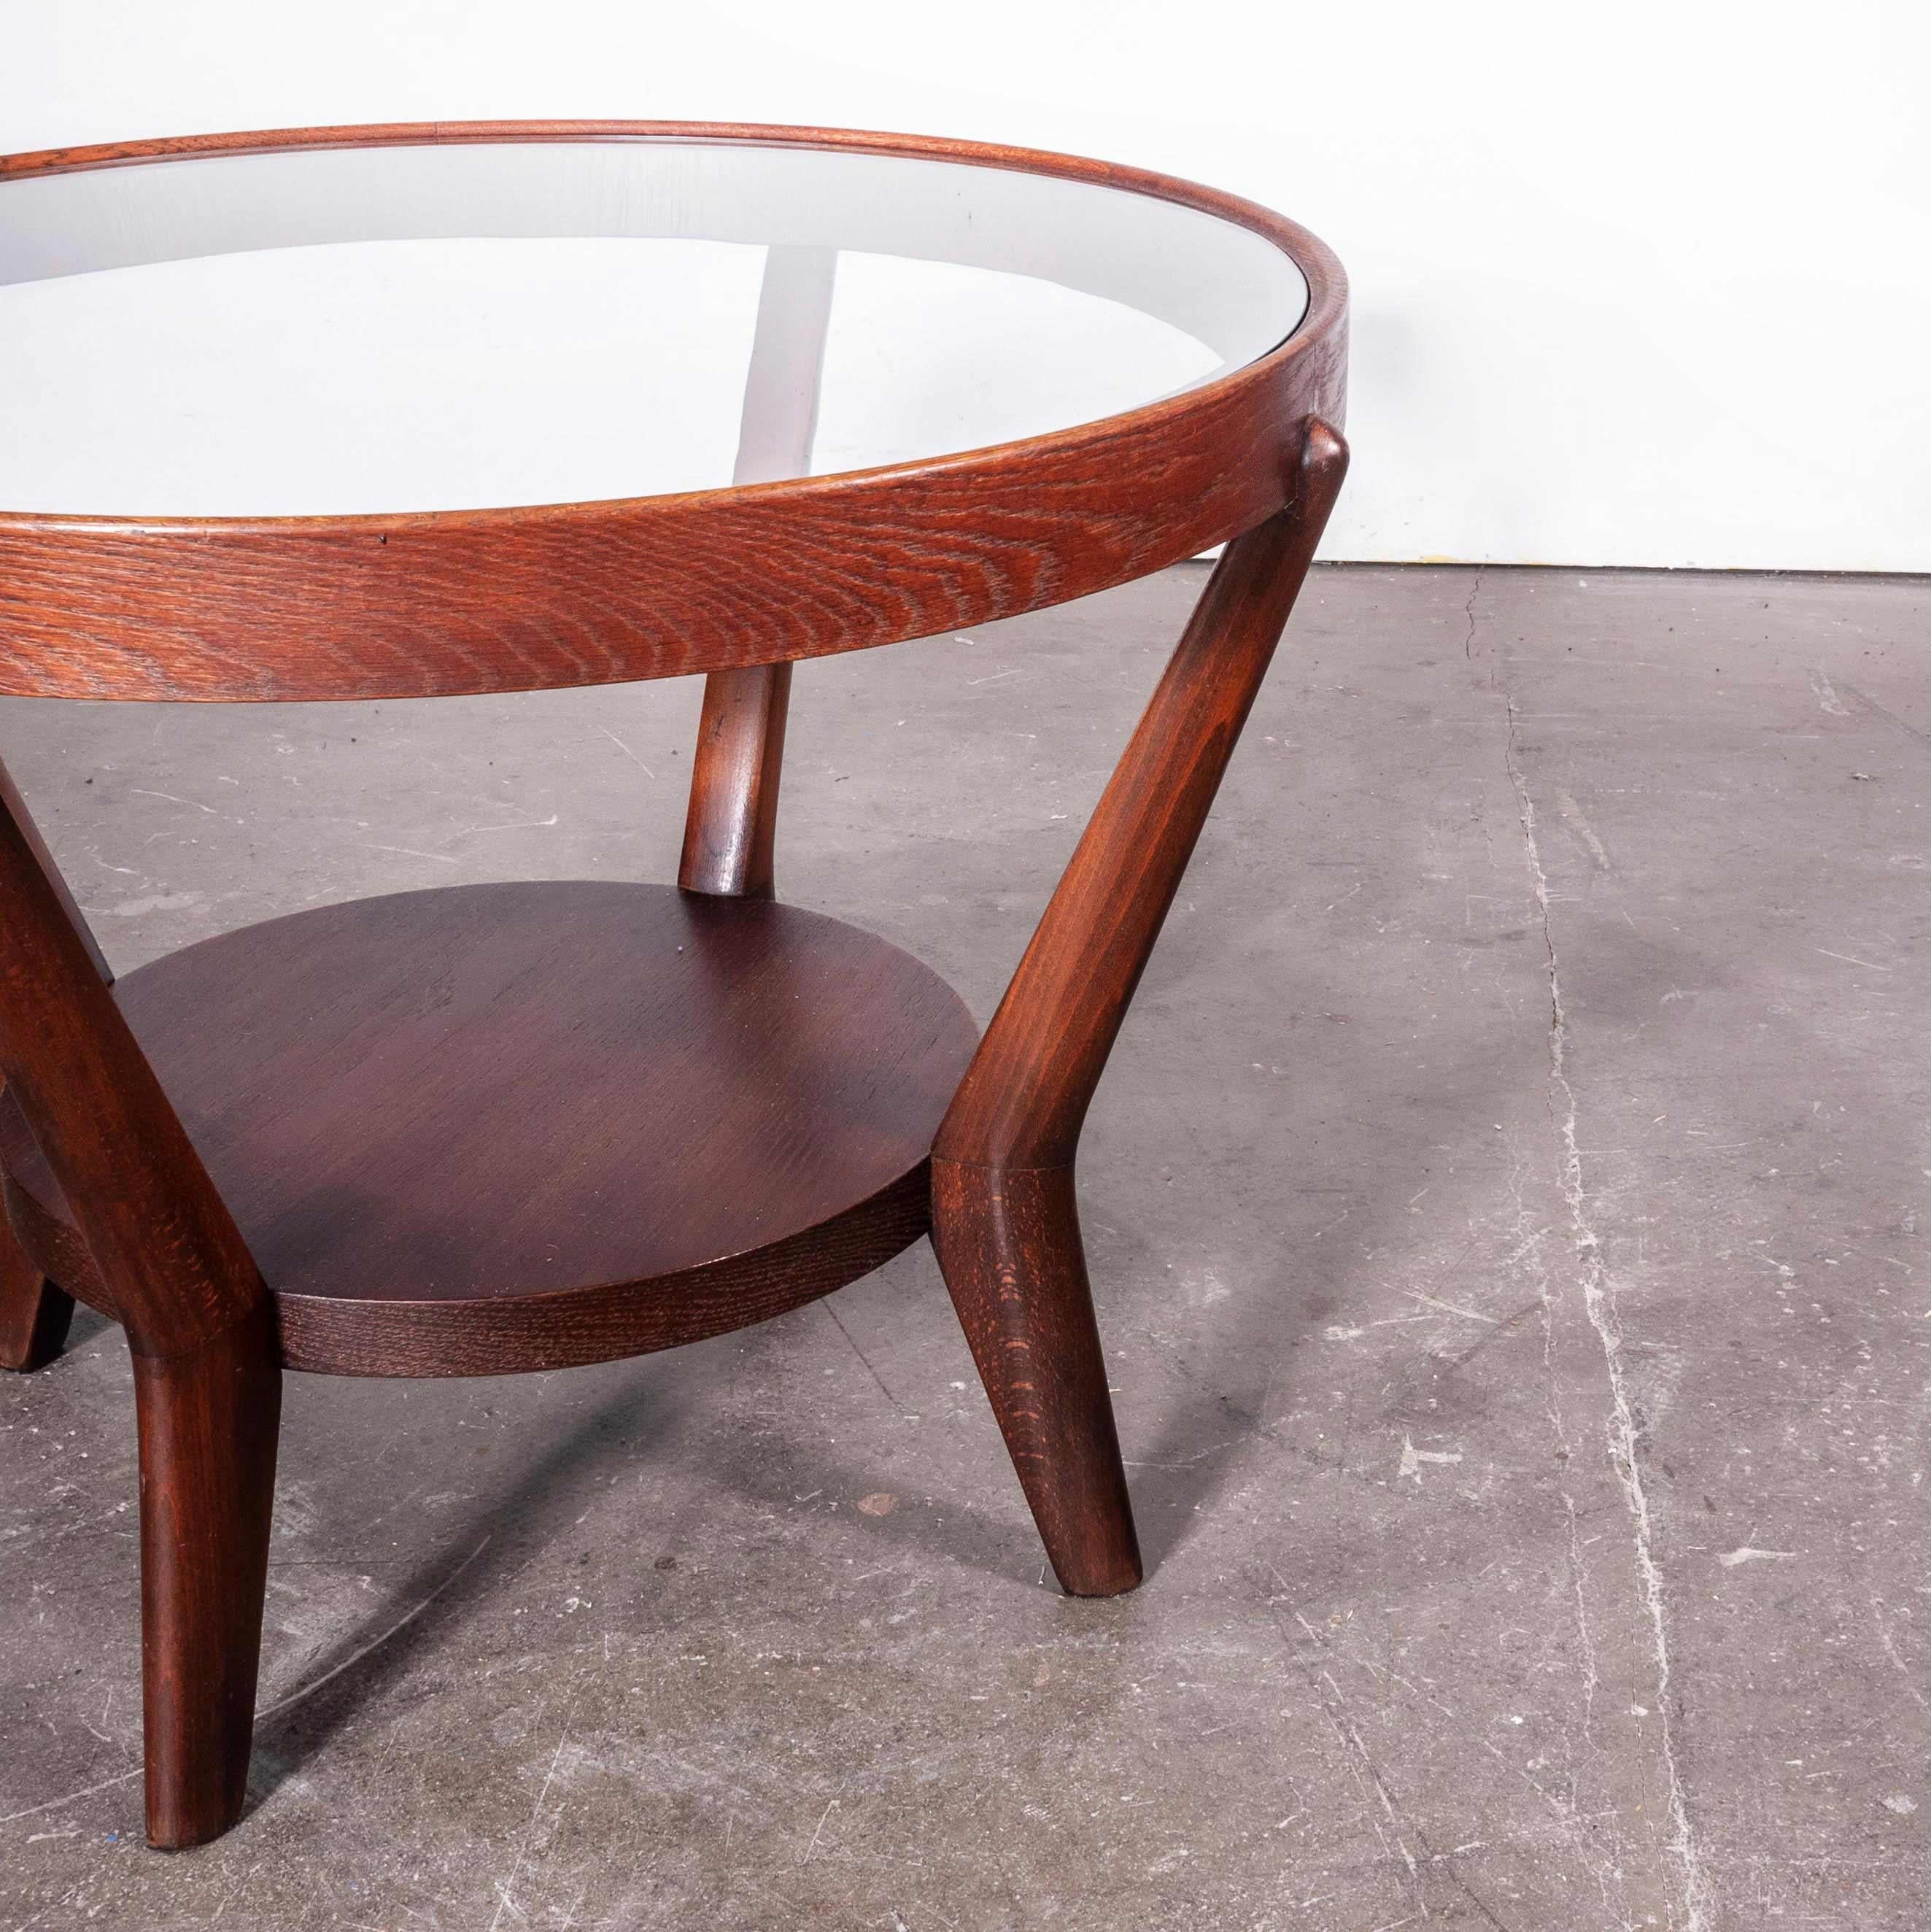 Mid-20th Century 1950s Round Occasional Table by Kozelka and Kropacek for Interieur Praha, Dark